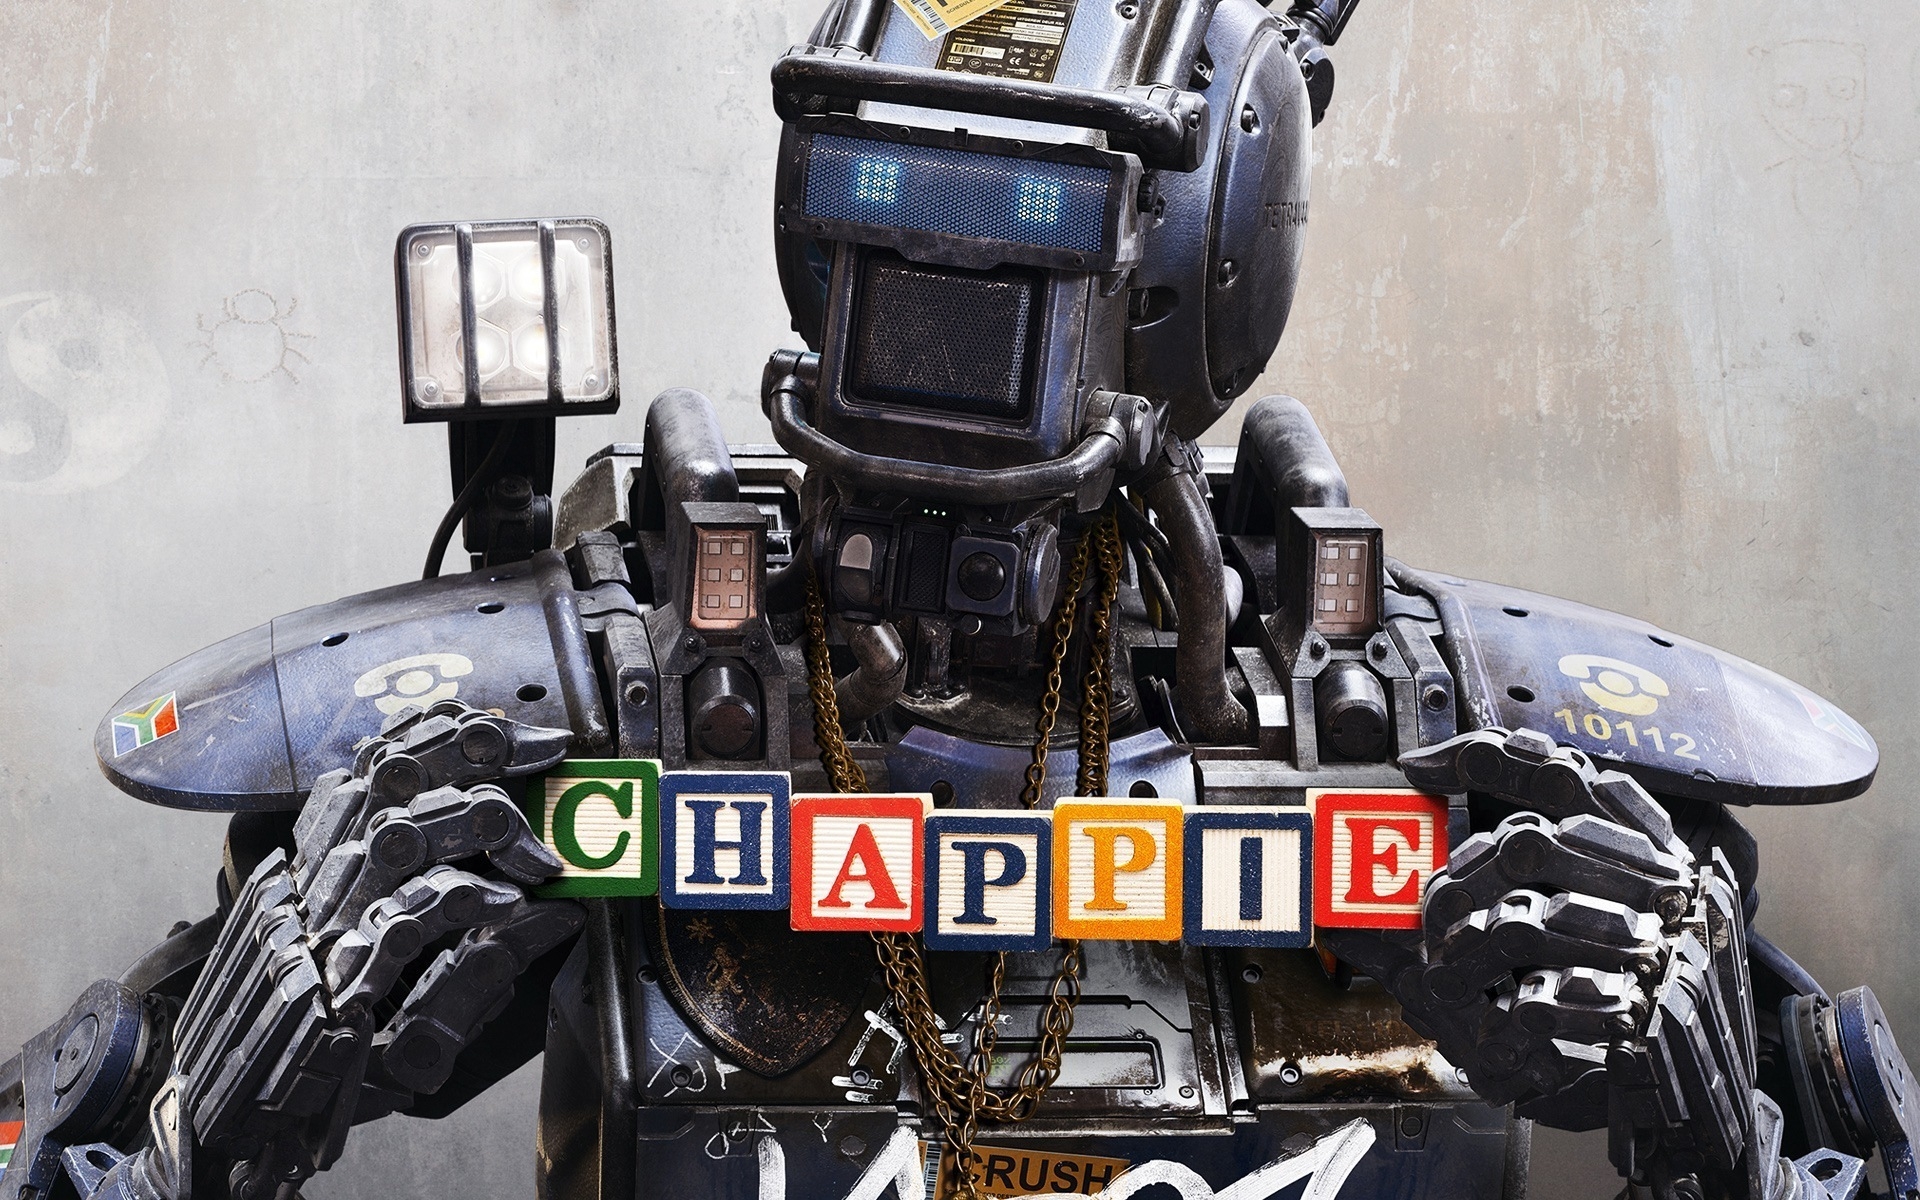 Chappie Robot for 1920 x 1200 widescreen resolution